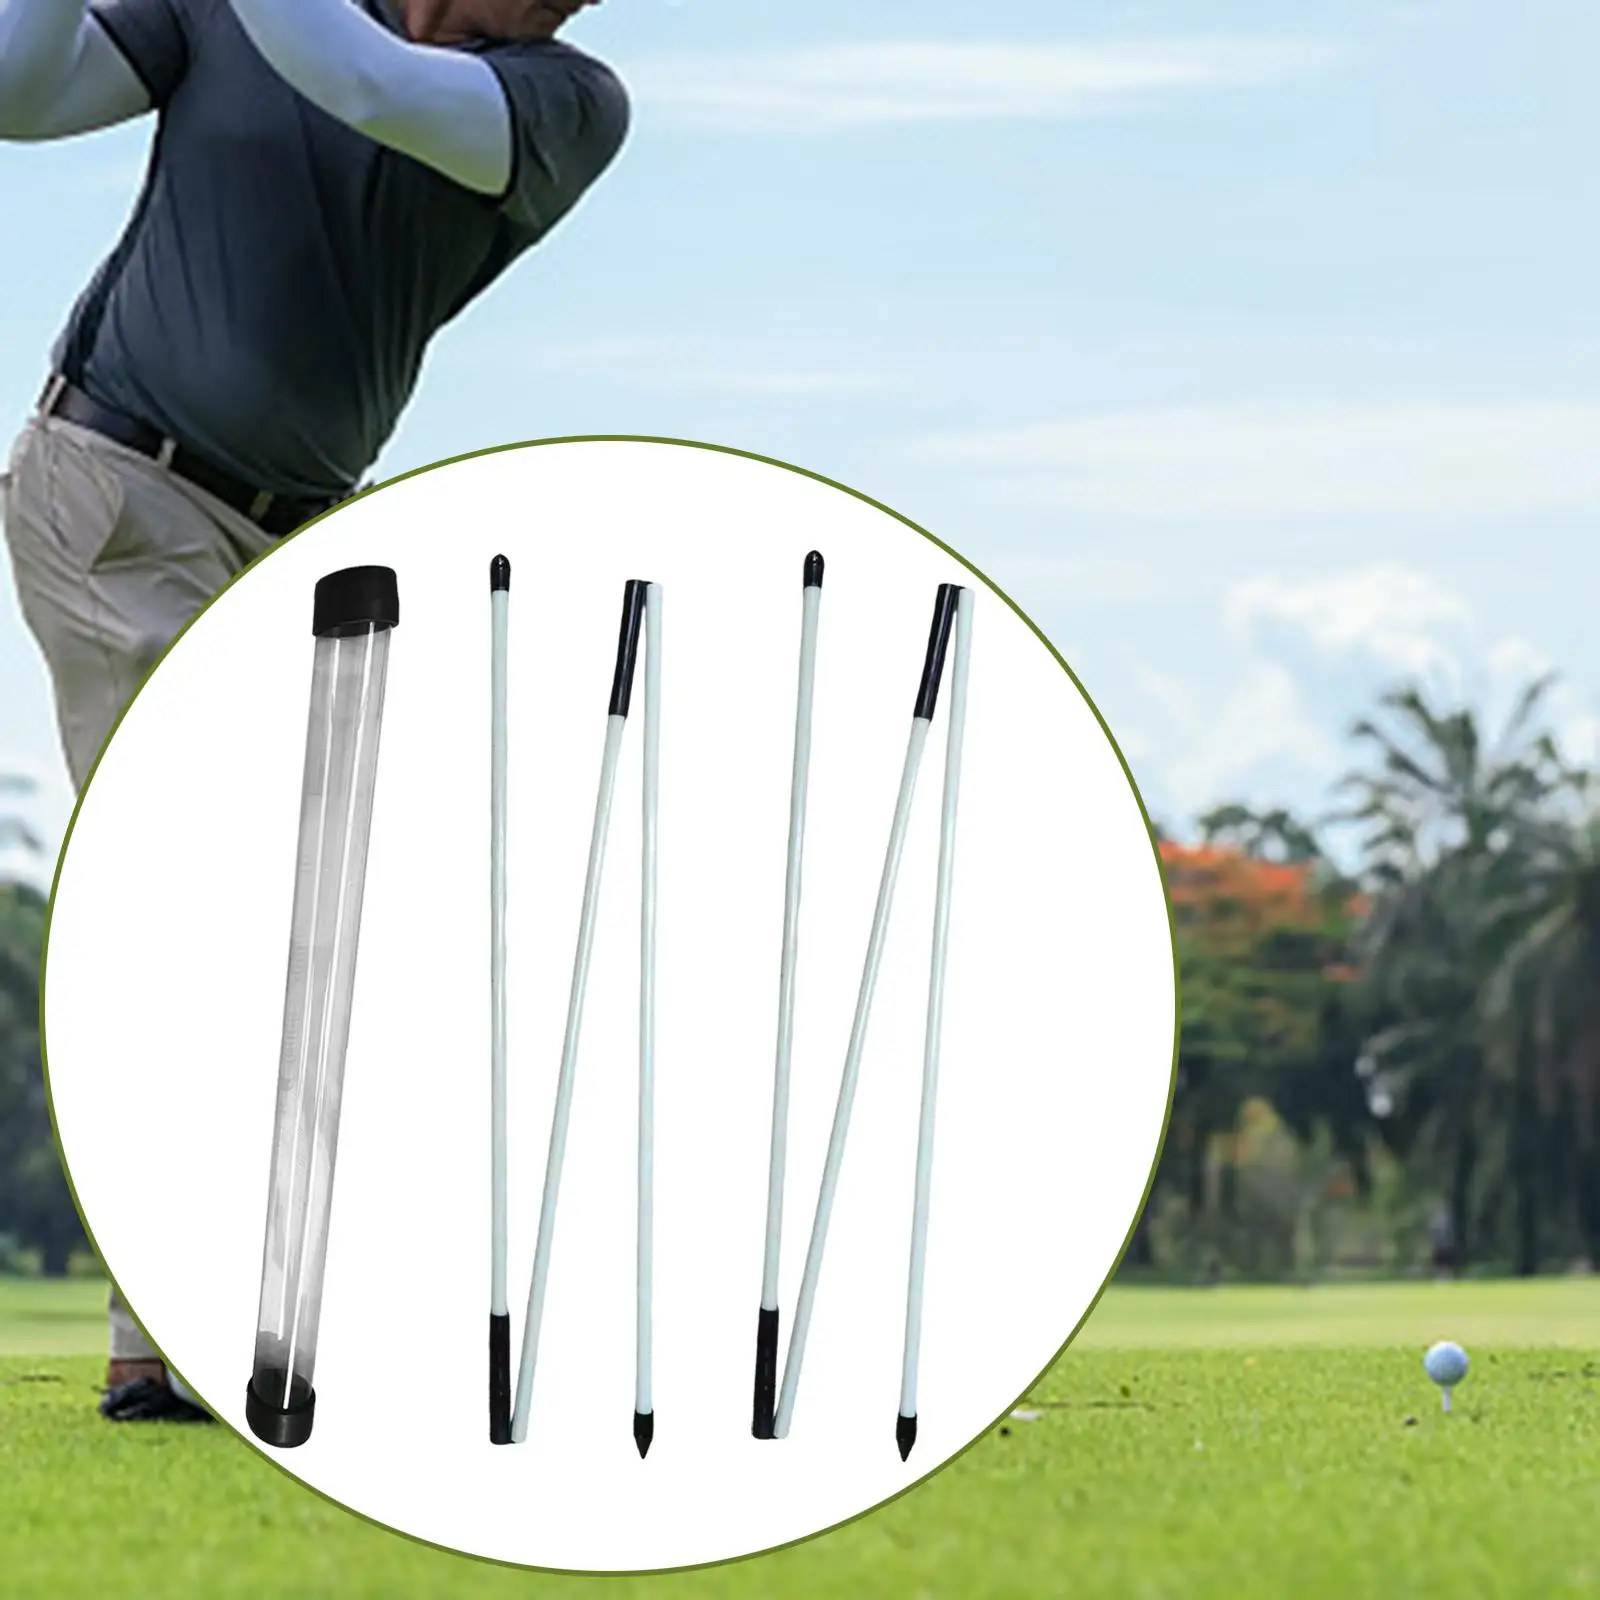 Pack of 2 Golf Alignment Training Sticks Collapsible 48 inch Golf Alignment Tool Golf Training Equipment for Putting Aiming